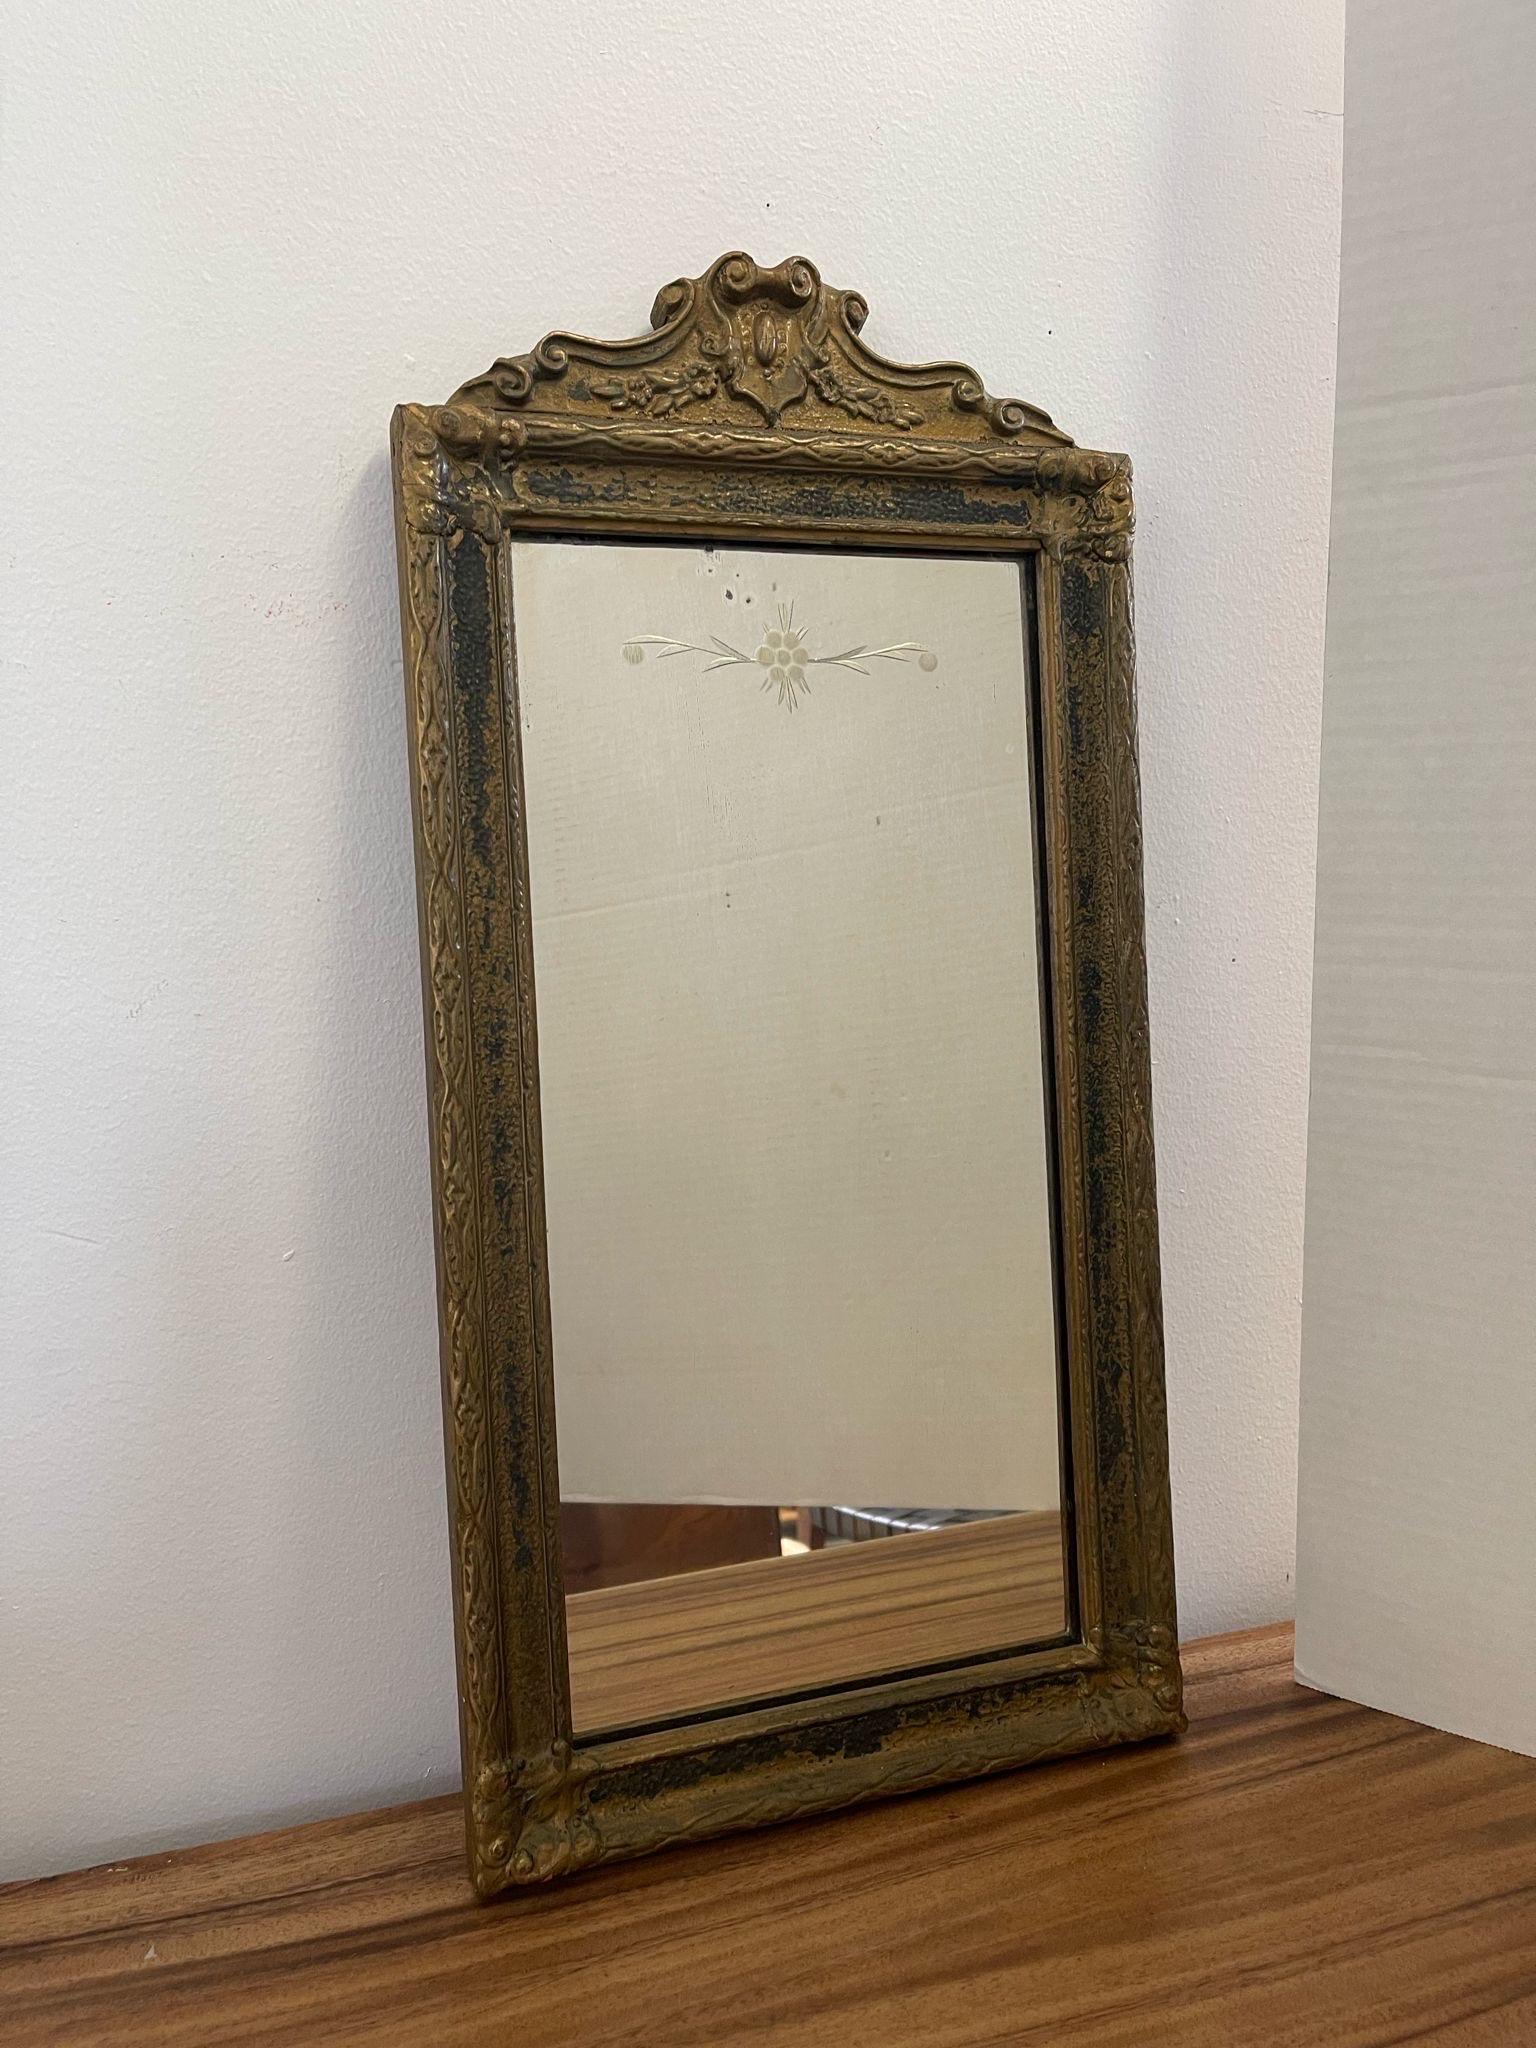 The Petina on the frame shows that it may have originally been gilted wood. Ornate detailing on the wooden frame with arched Top. Beautiful Petina and Aging to the frame and mirror. Possibly Circa 1920s. No Maker’s mark. Vintage Condition Consistent